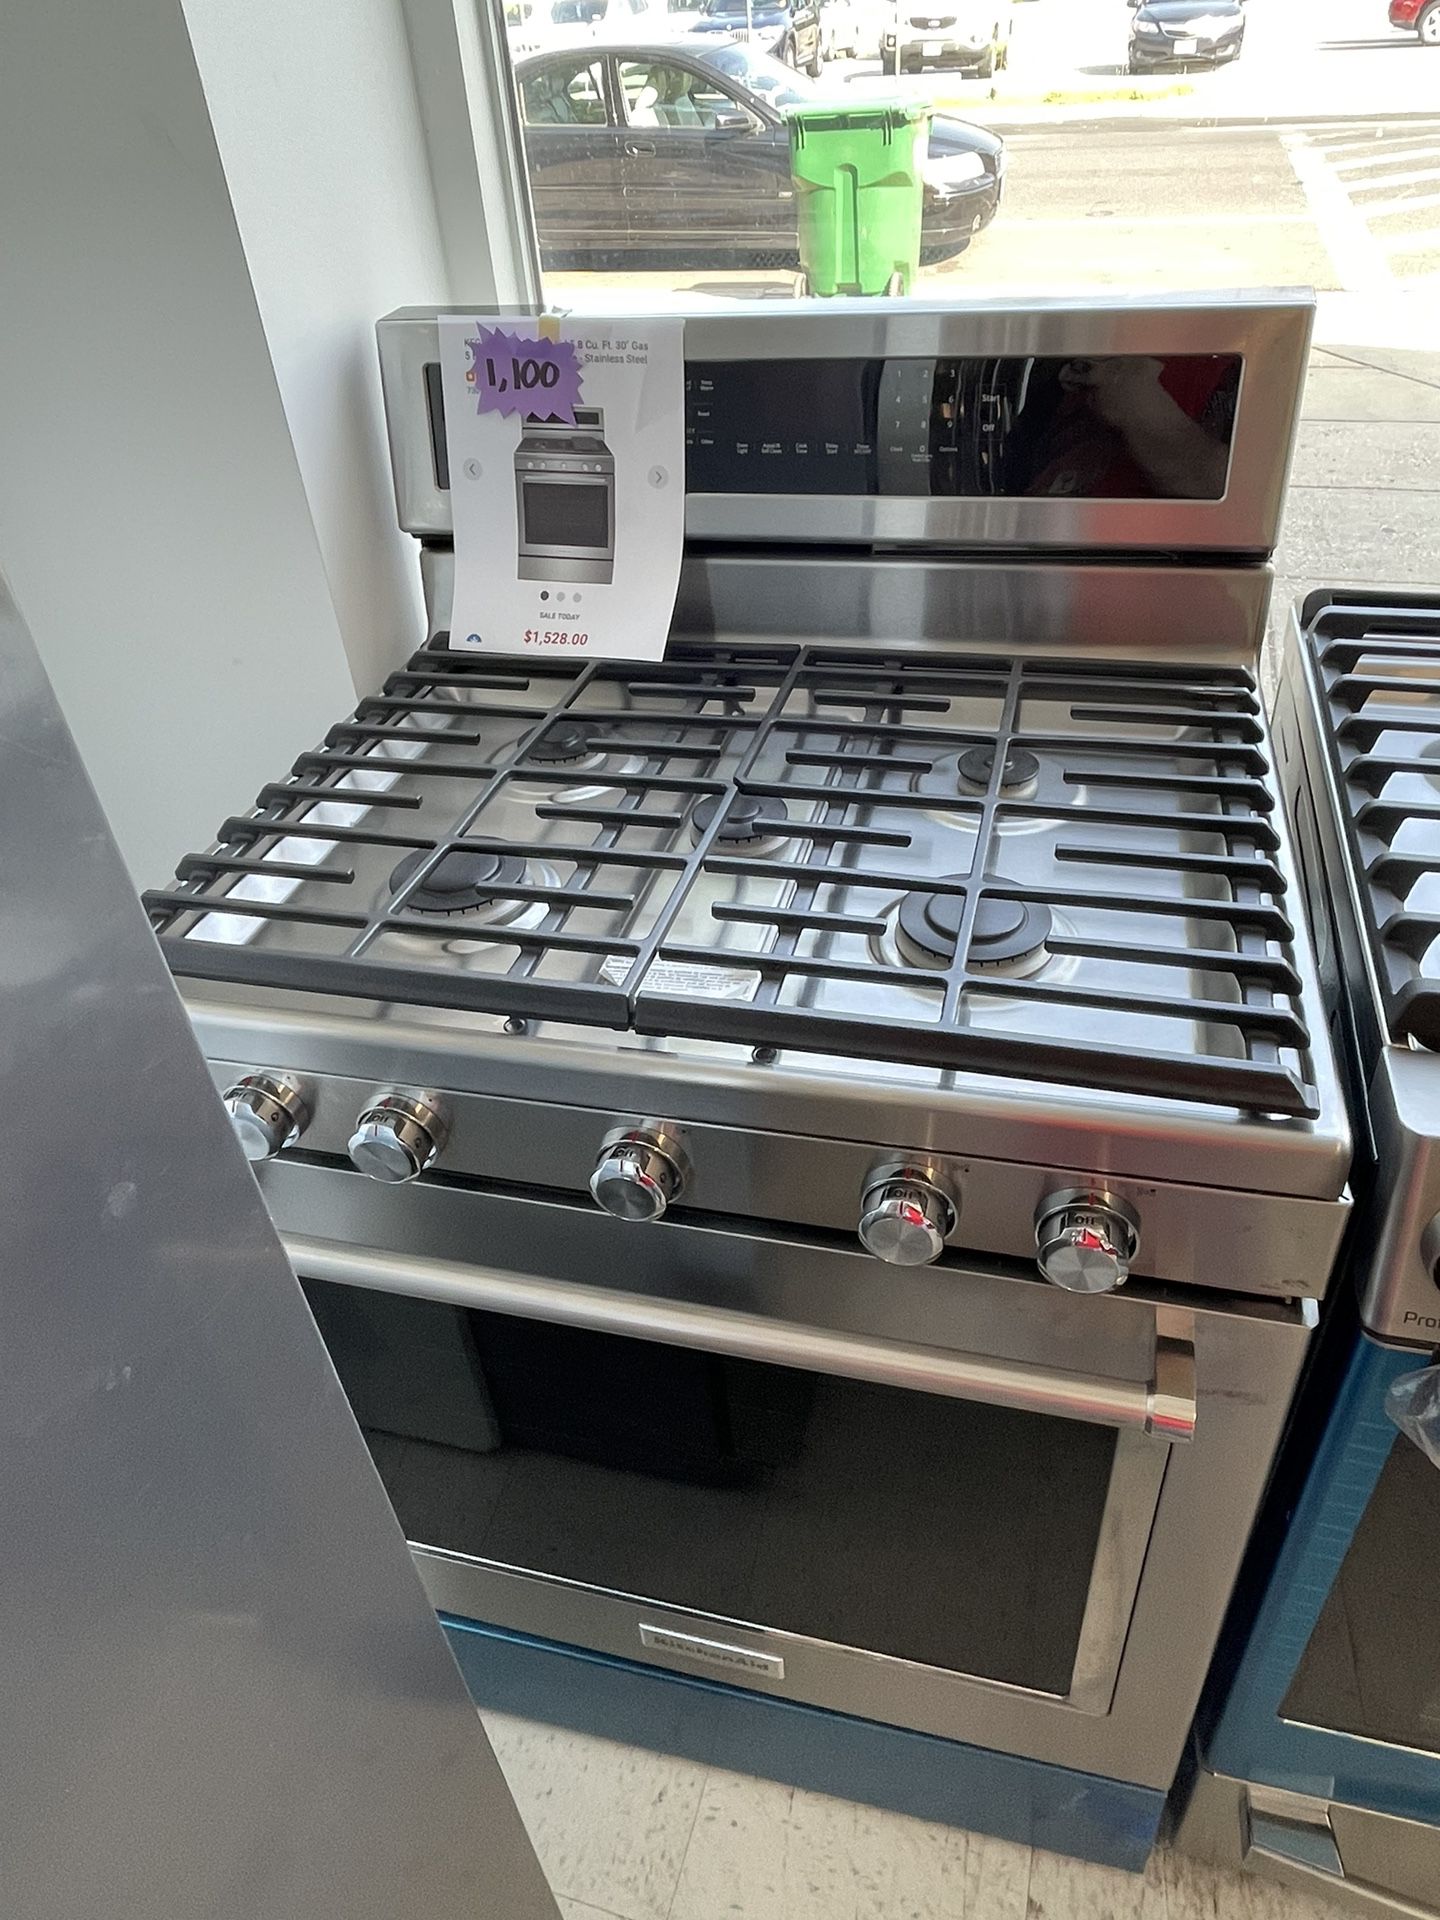 KitchenAid Gas Range Stove New Scratch And Dent With 6months Warranty 